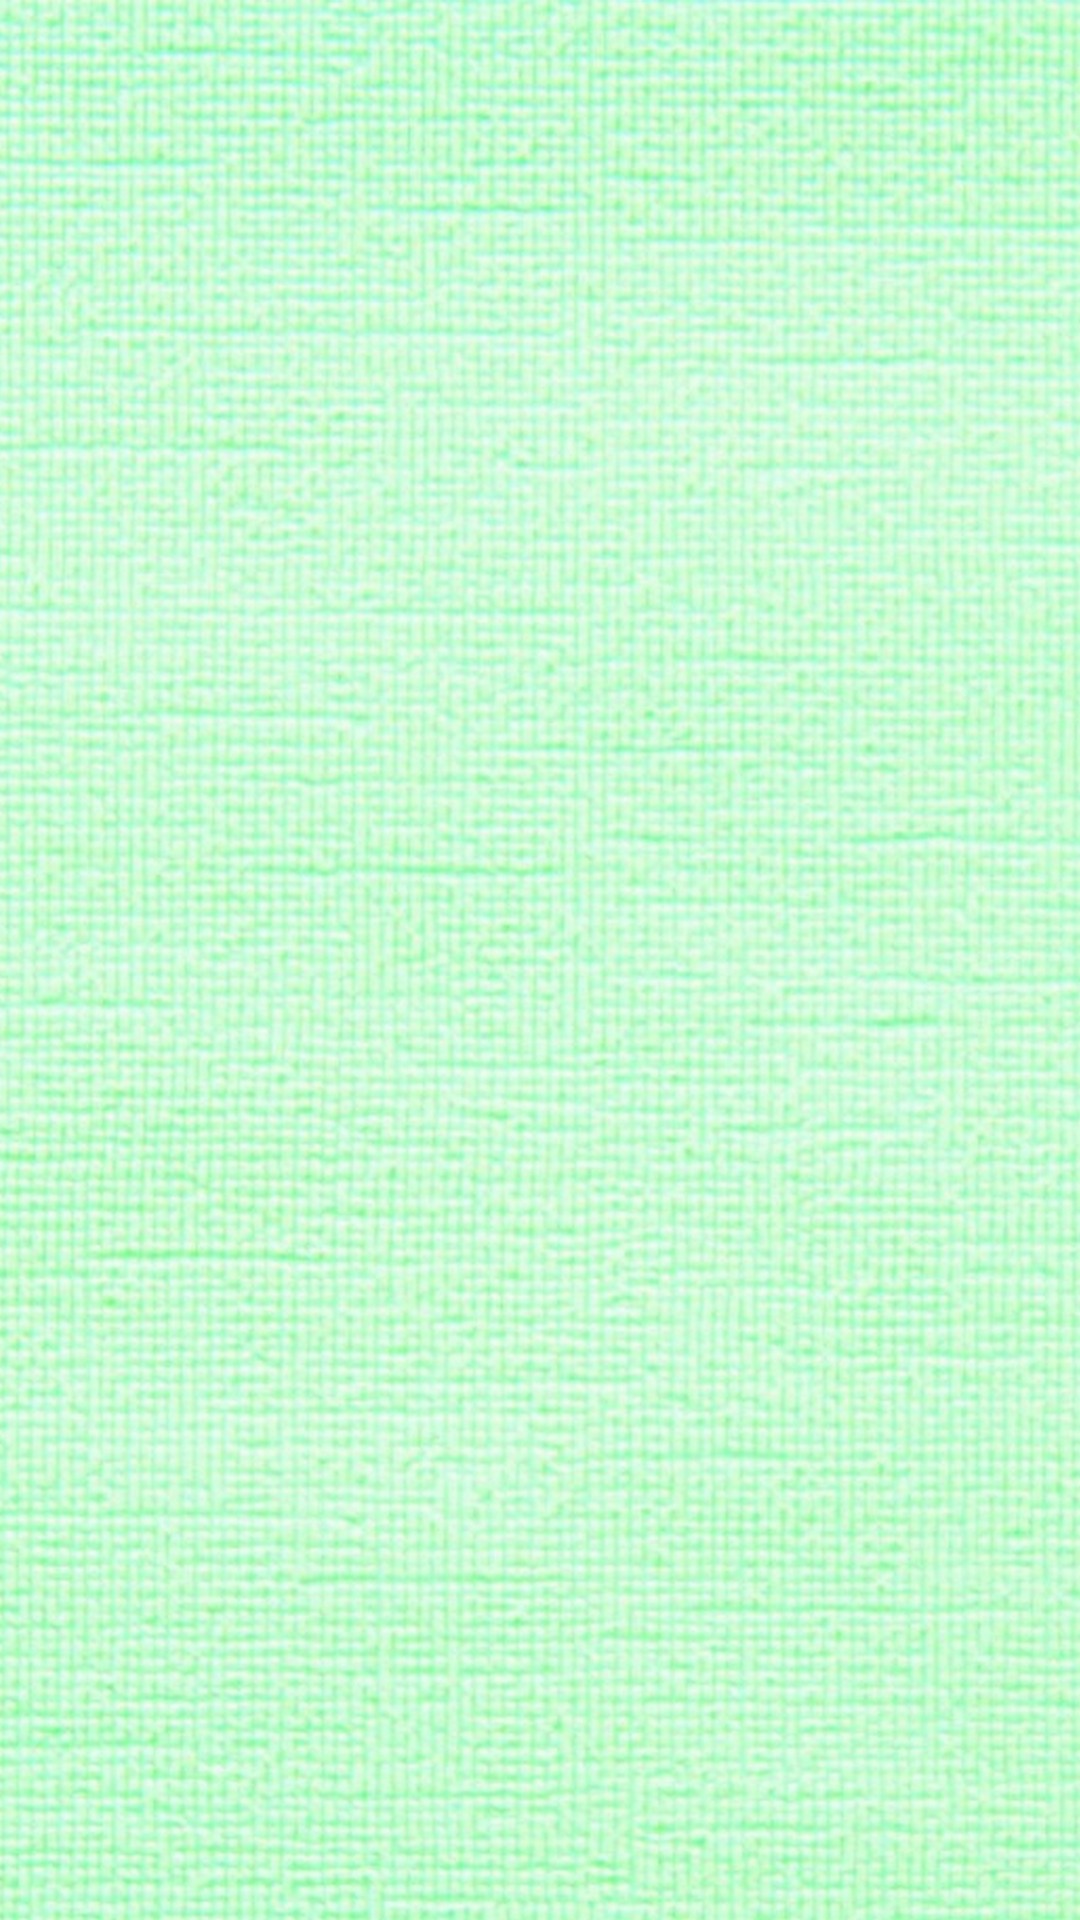 Wallpaper iPhone Mint Green with resolution 1080X1920 pixel. You can make this wallpaper for your iPhone 5, 6, 7, 8, X backgrounds, Mobile Screensaver, or iPad Lock Screen